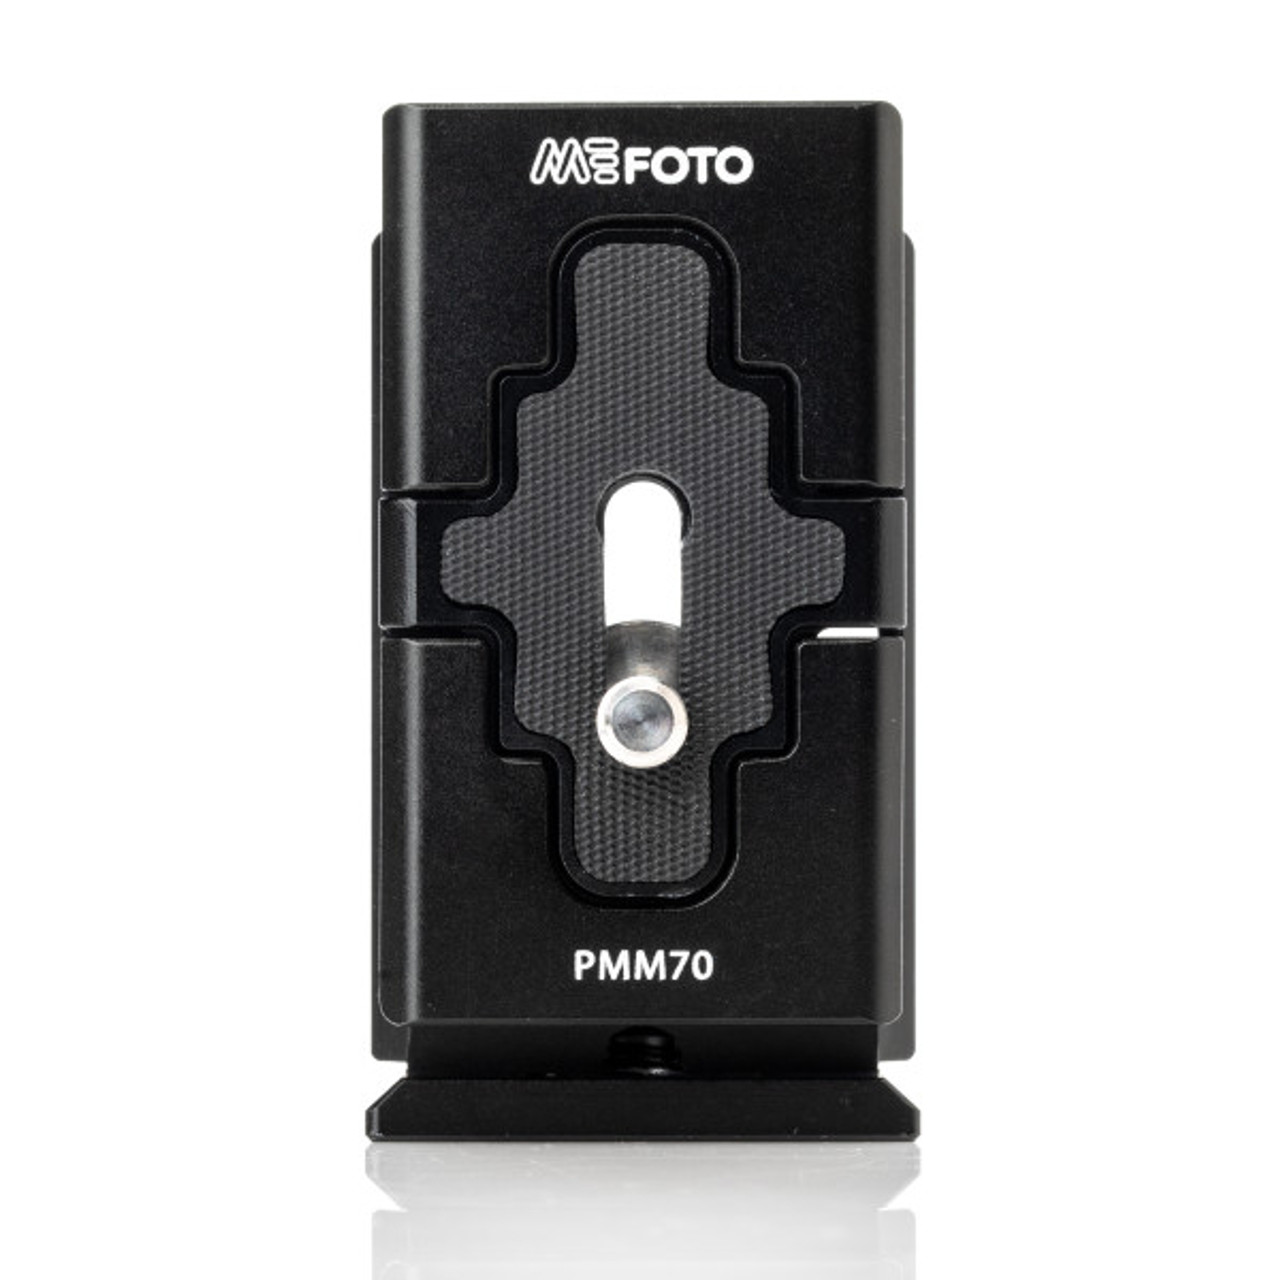 BENRO MEVIDEO QUICK RELEASE PLATE FOR ROADTRIPPRO